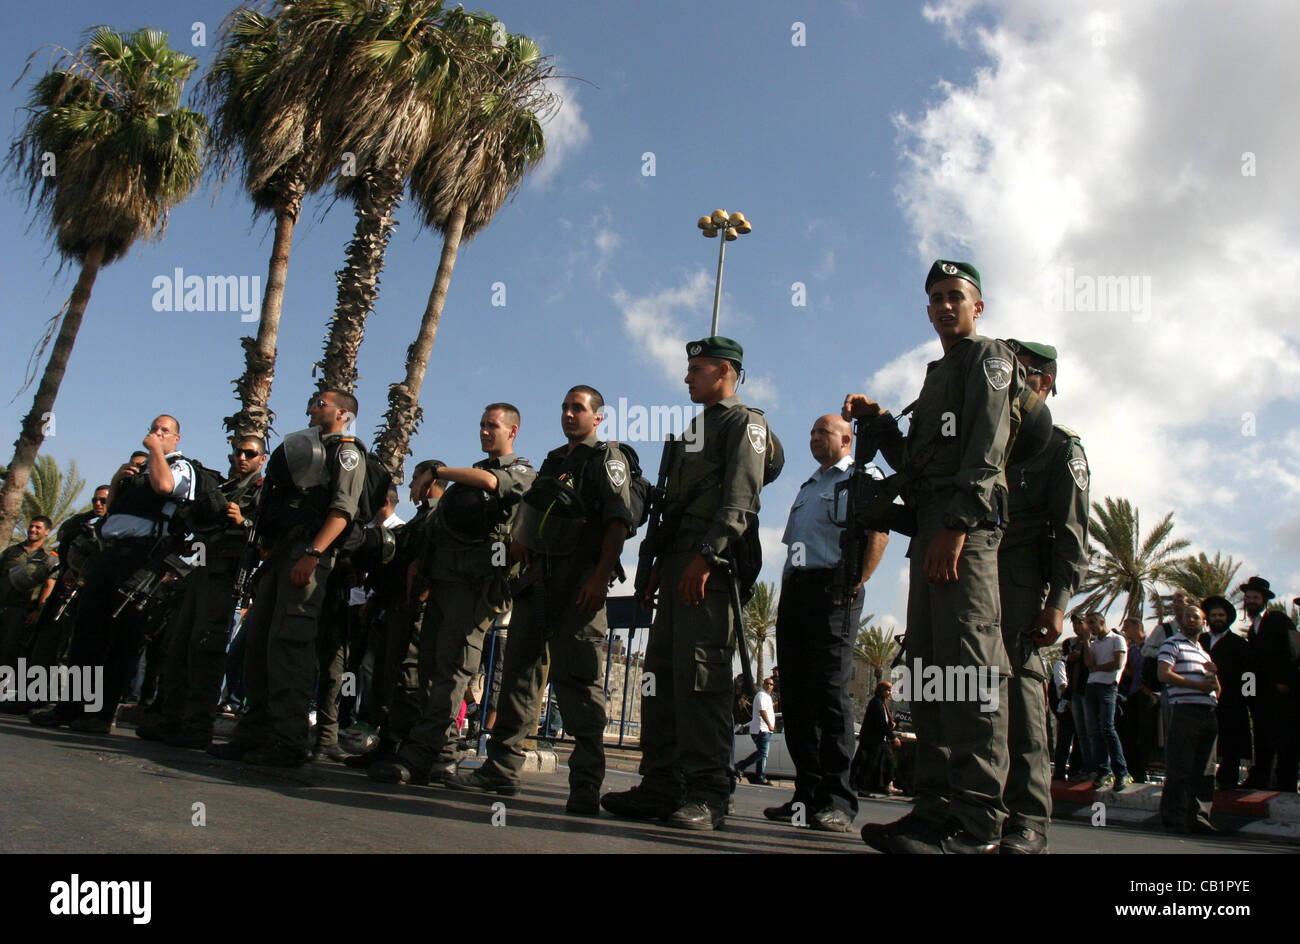 May 19, 2012 - Jaffa, Jerusalem, Palestinian Territory - Israeli police Prevented Palestinian demonstrators as they try to disperse a protest against a parade marking Jerusalem Day, in front of Damascus Gate outside Jerusalem's Old City May 20, 2012. Jerusalem Day marks the anniversary of Israel's c Stock Photo